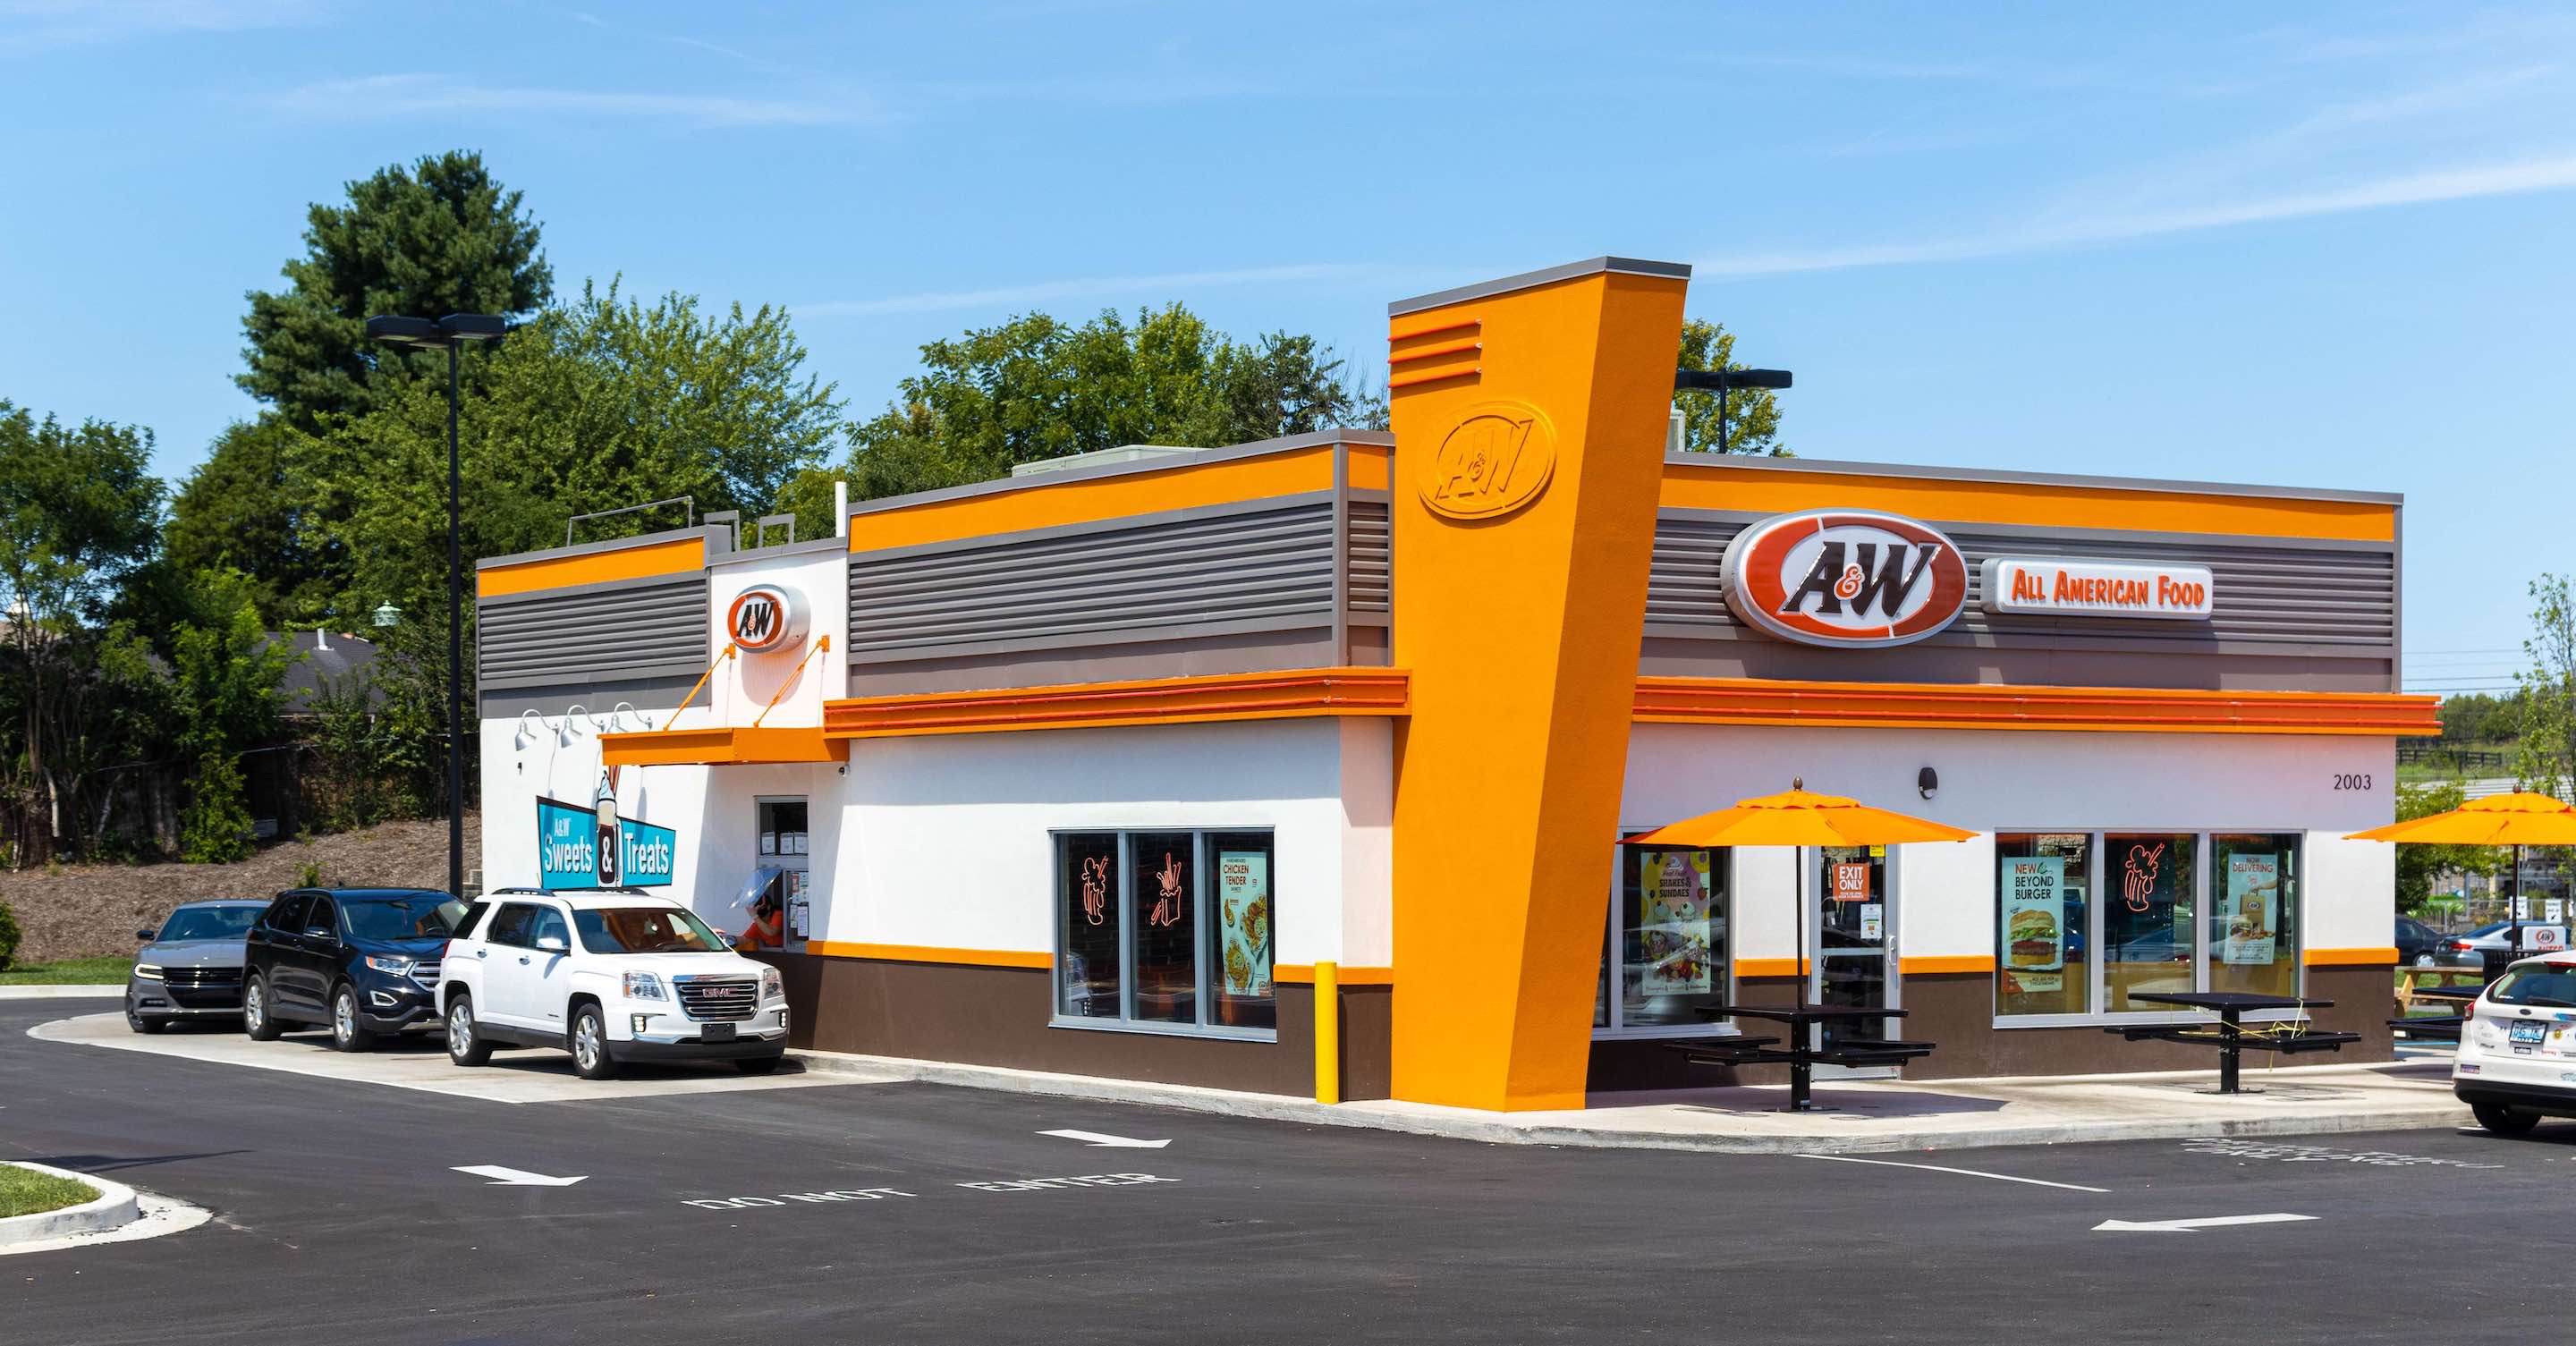 The NCIDA recently reviewed plans for the addition of two new restaurants in the downtown Niagara Falls corridor: A&W Restaurant and Moe's Southwest Grill. Shown is a stock image of an A&W Restaurant, courtesy of the company.